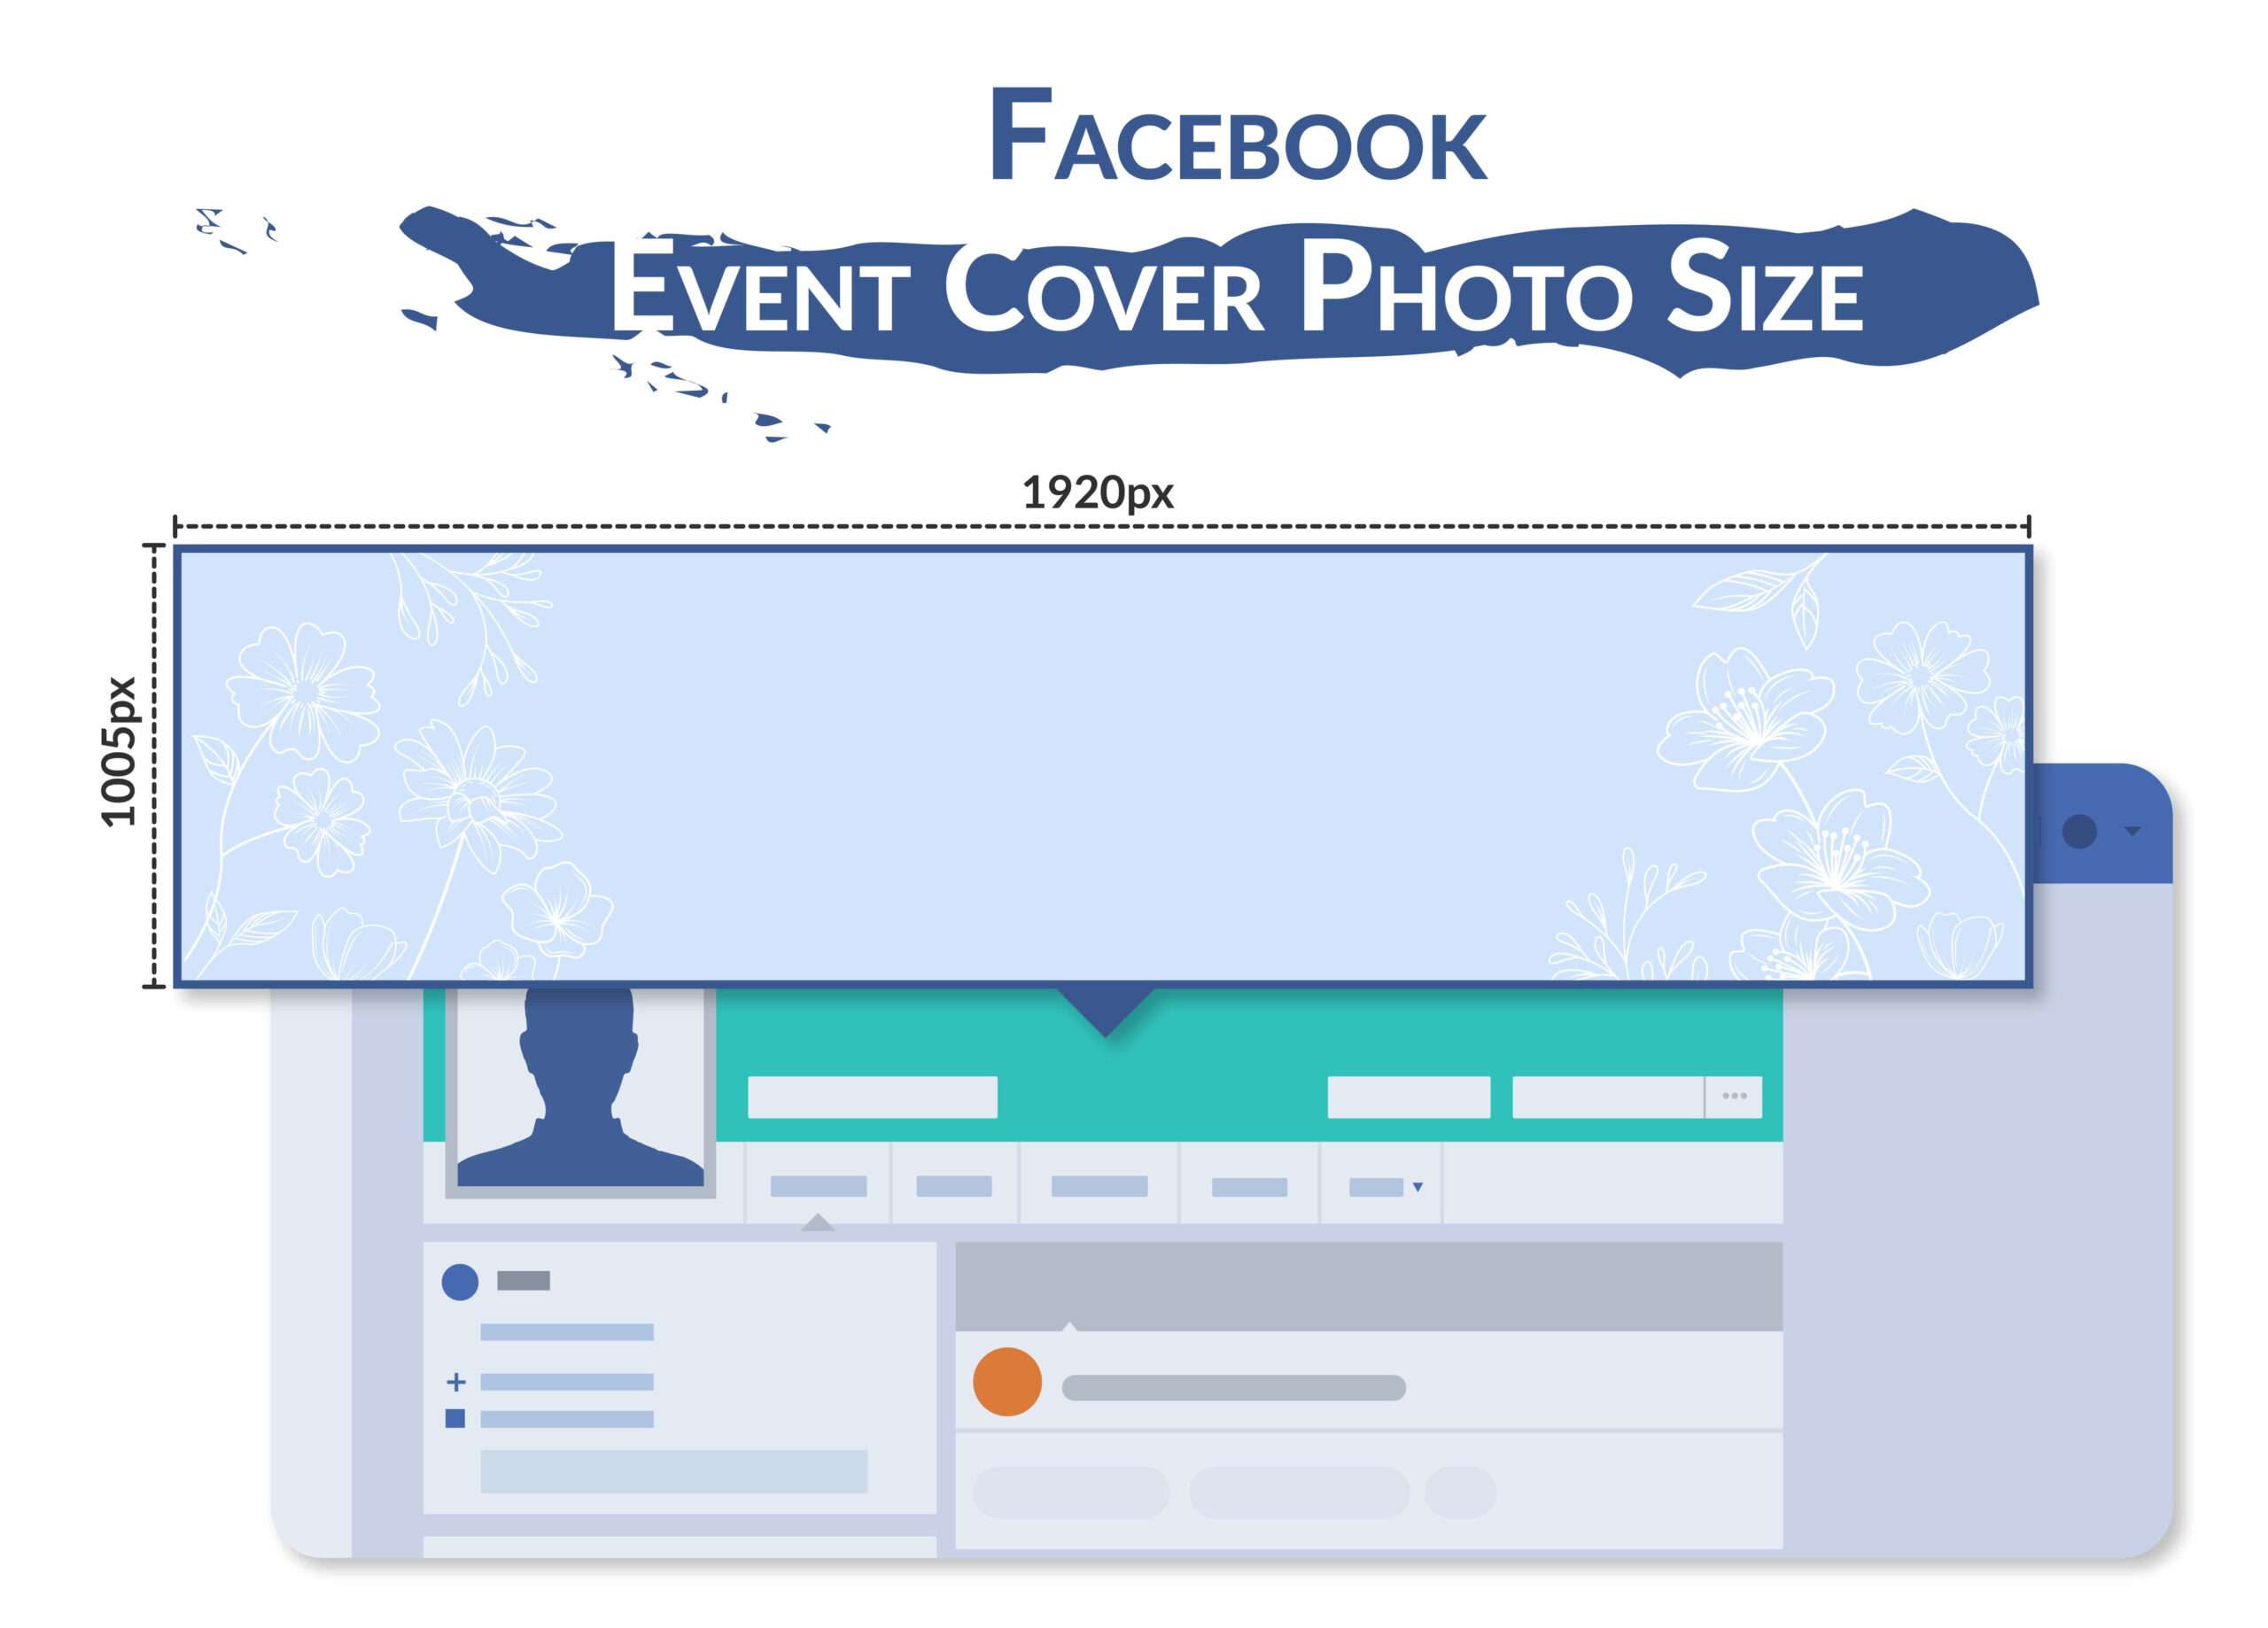 Facebook event cover photo size